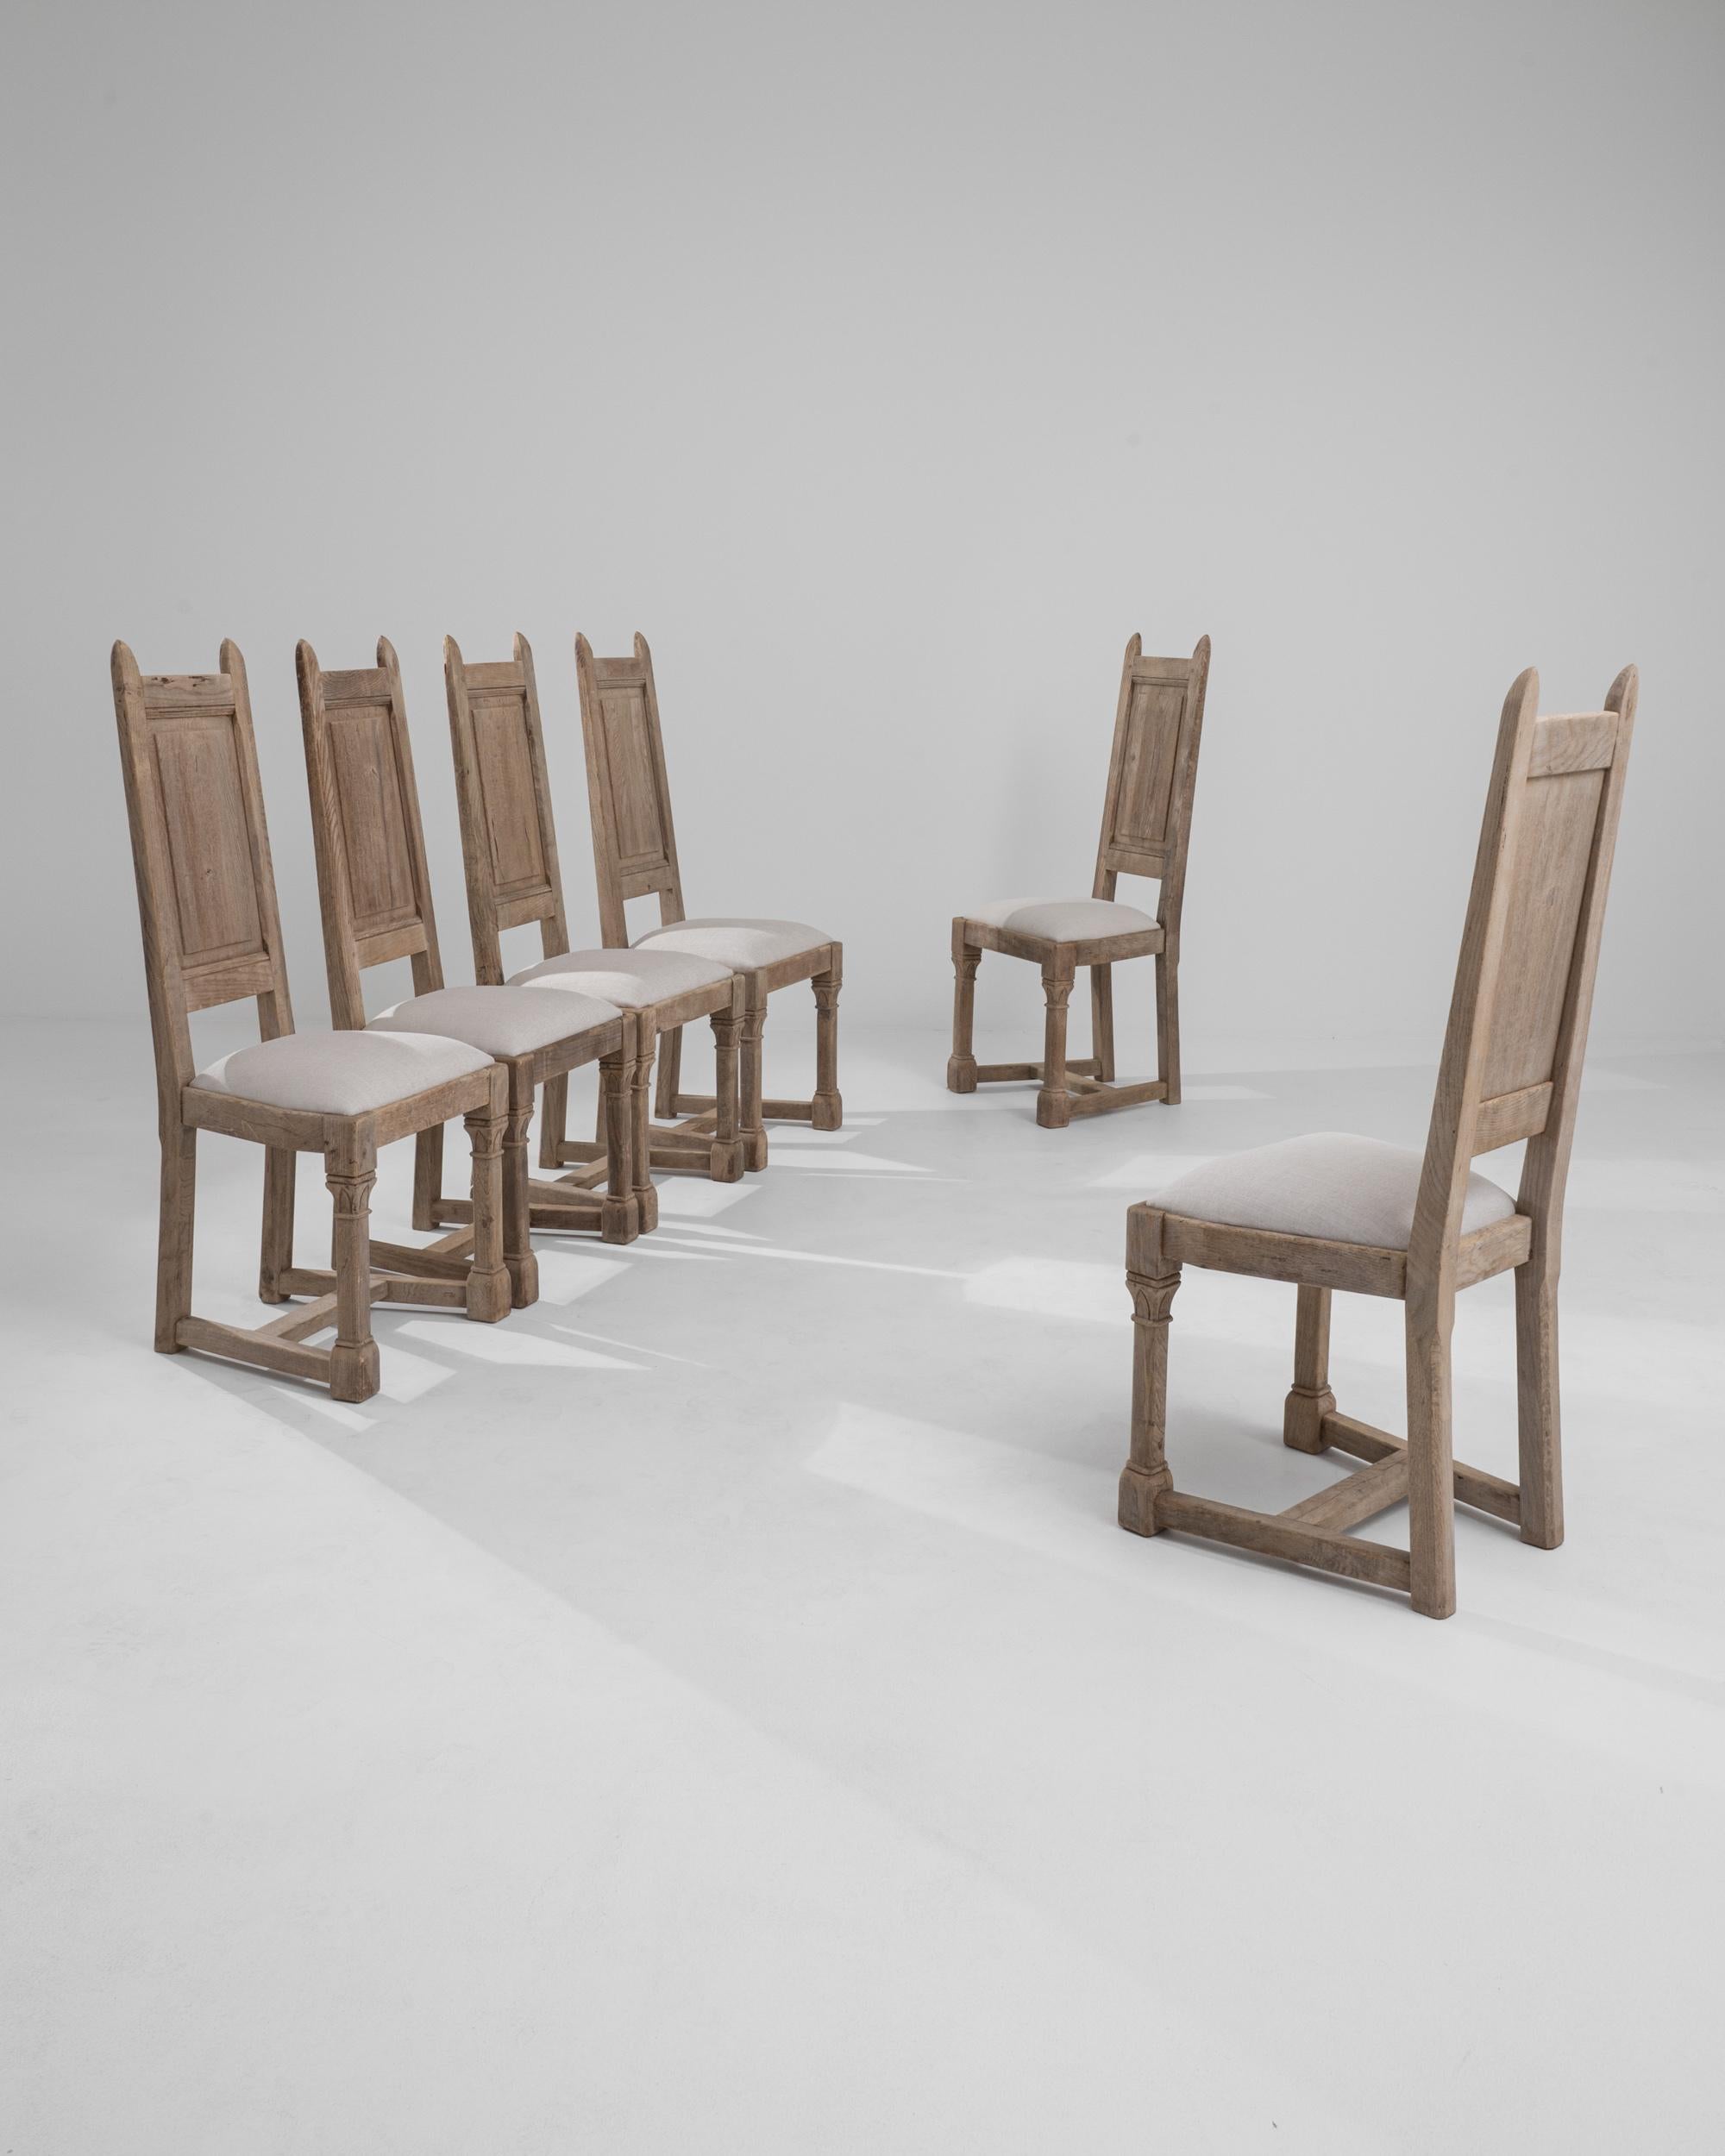 A set of six wooden upholstered dining chairs created in 20th century Belgium. Made in a traditional farmhouse style, this set of chairs imparts an appreciation for the modest and hand-crafted. The fresh off-white upholstery that dawns their seats